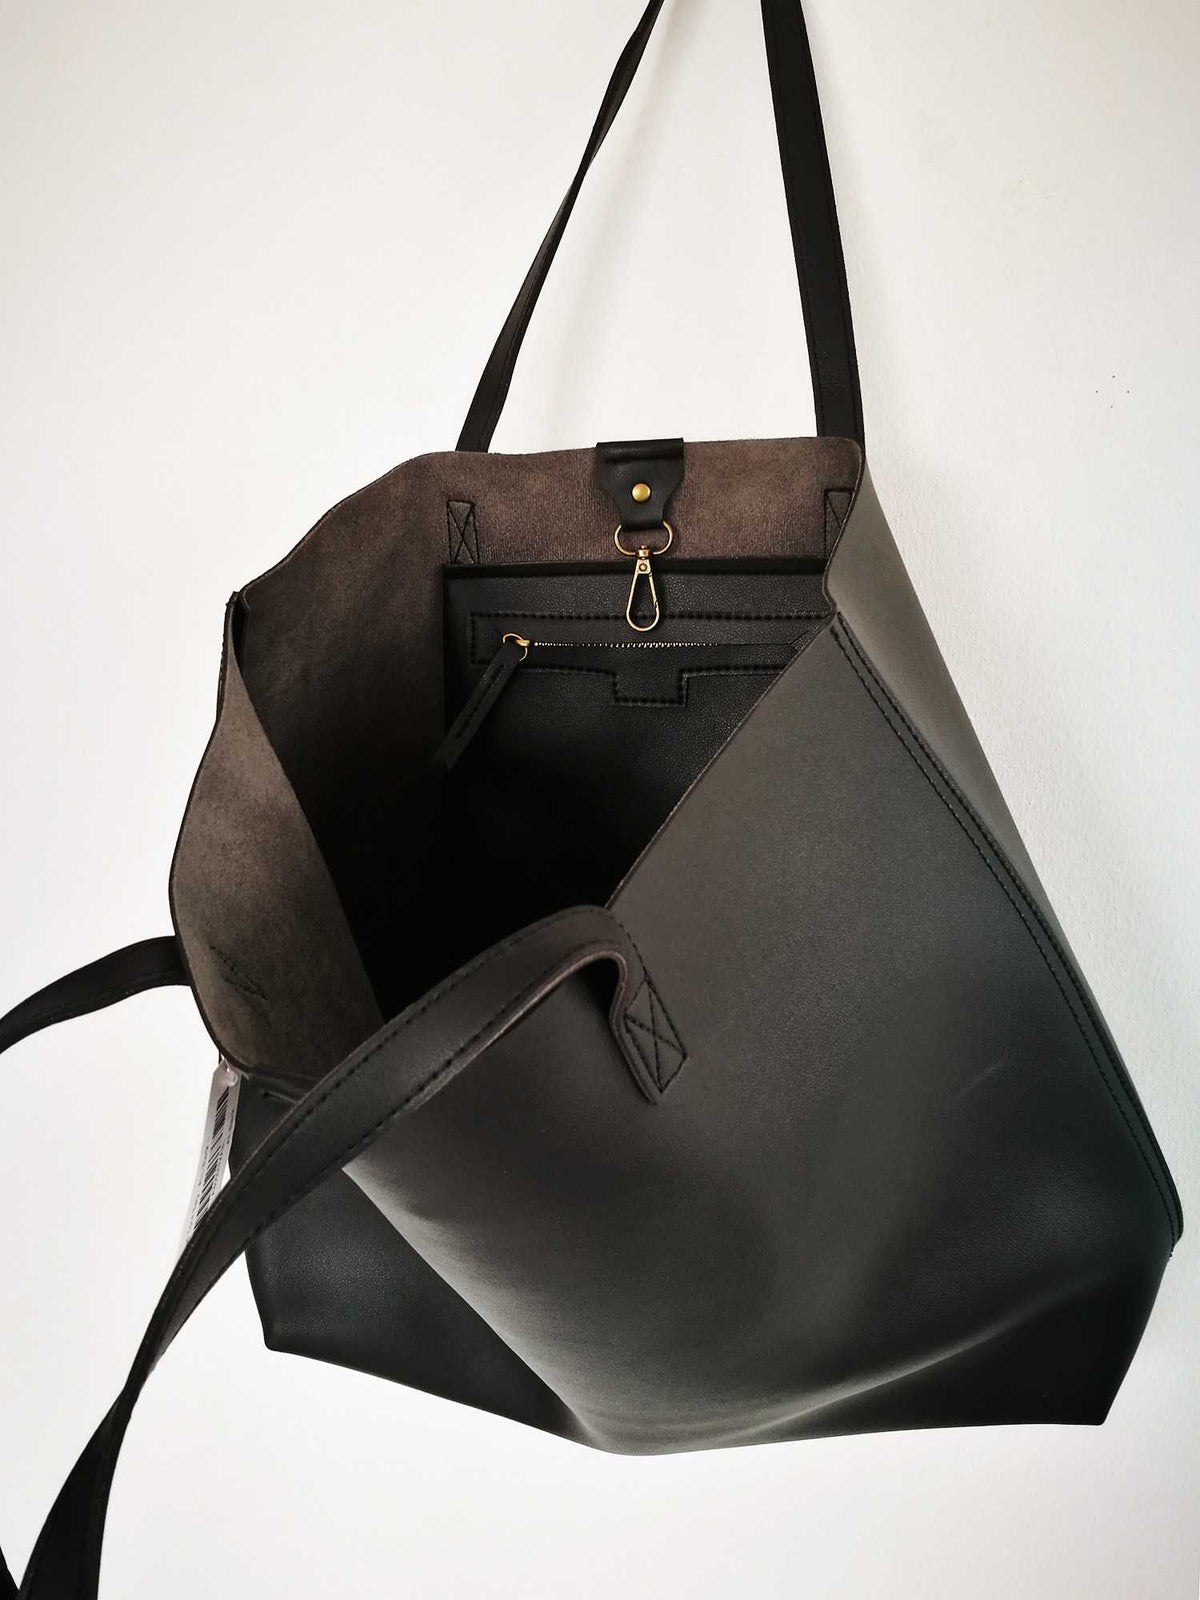 Oversized Tote Bag for Women: Black & Brown Leather Totes | Worthtryit – W.T.I. Design